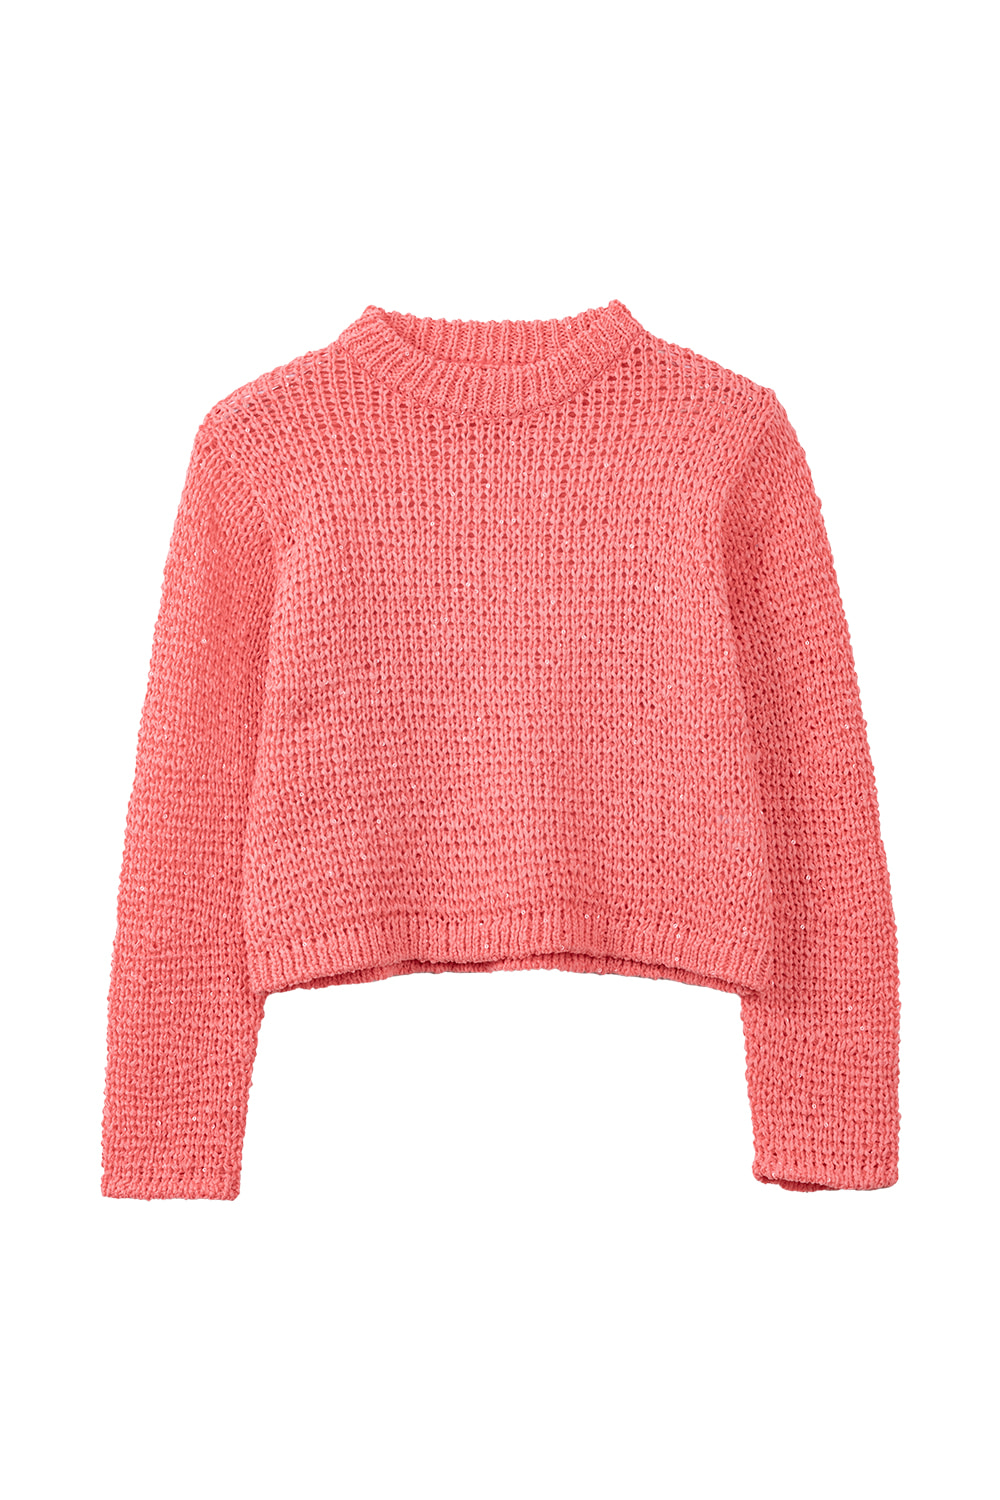 Pastel Spangle Knit Top (Coral)